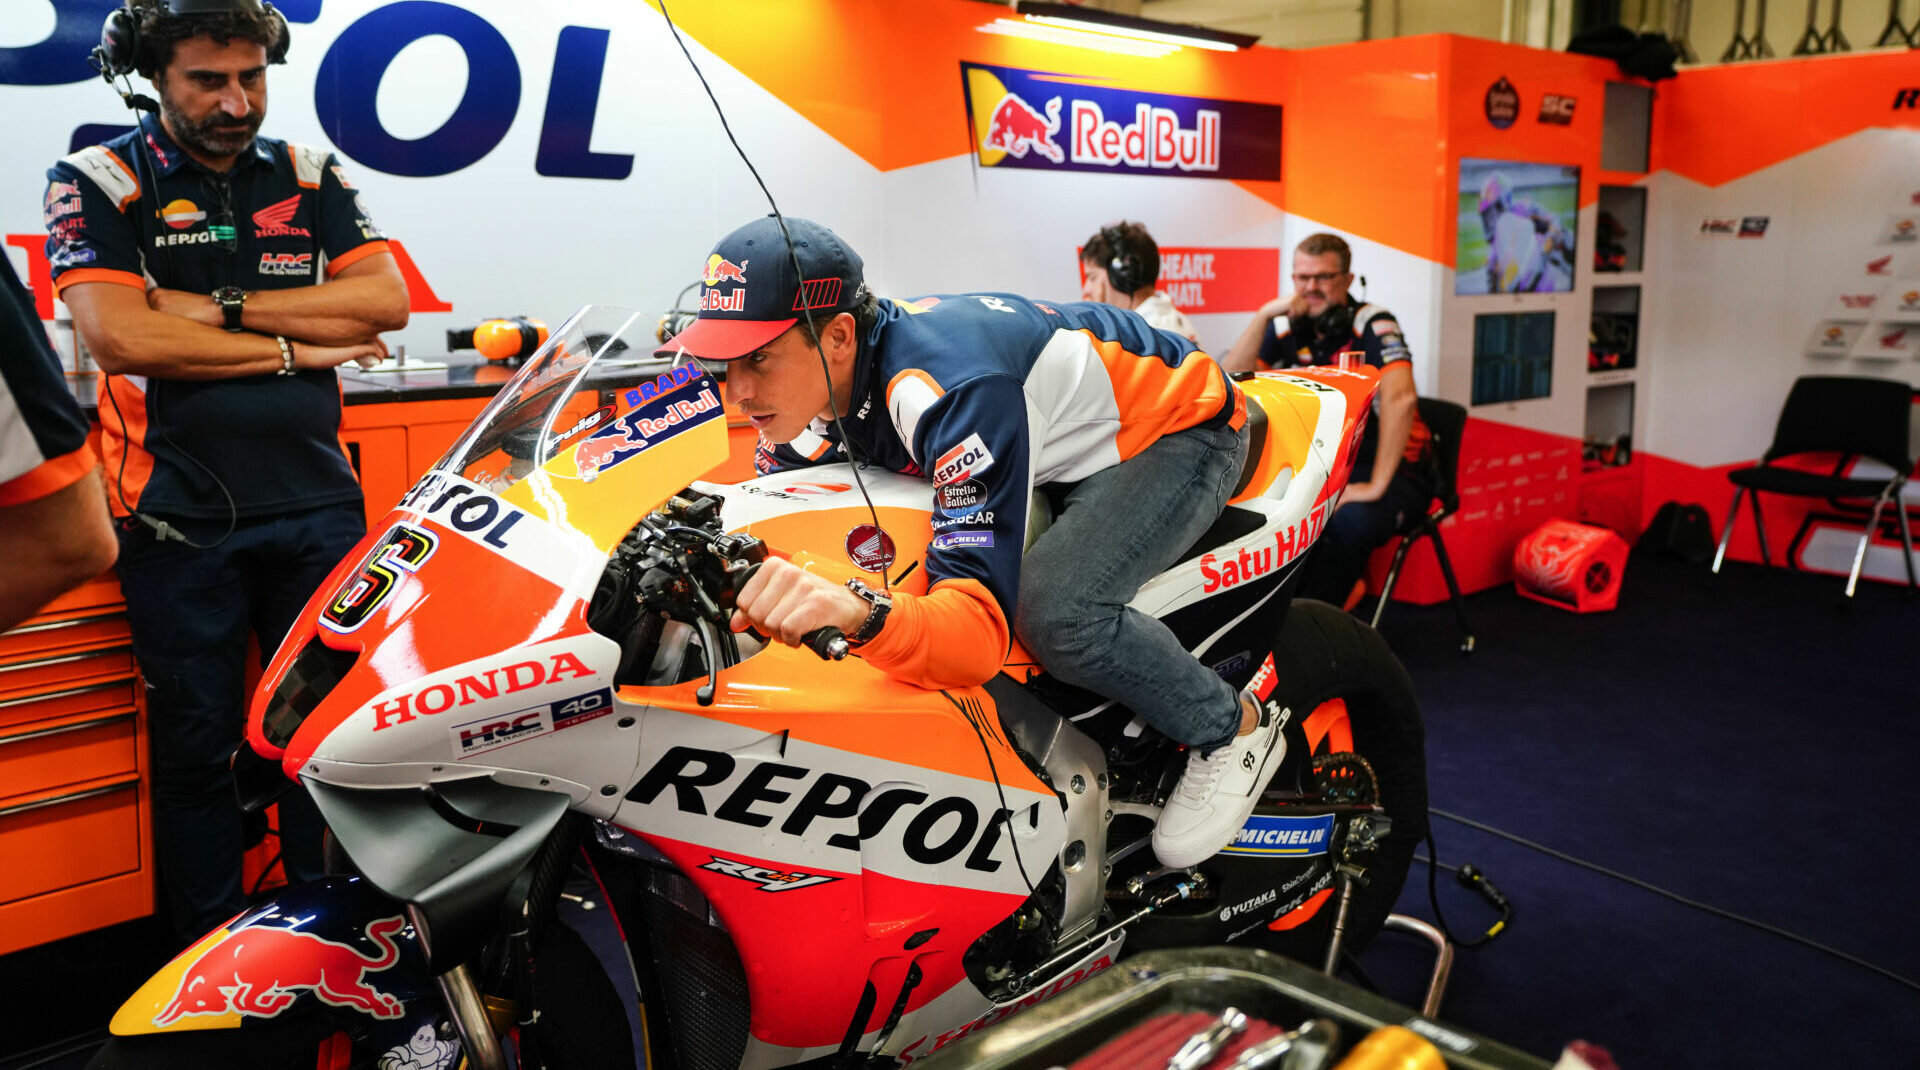 In preparation for his return from surgery, Marc Marquez visited the Repsol Honda team at the Austrian Grand Prix. Photo courtesy Repsol Honda.